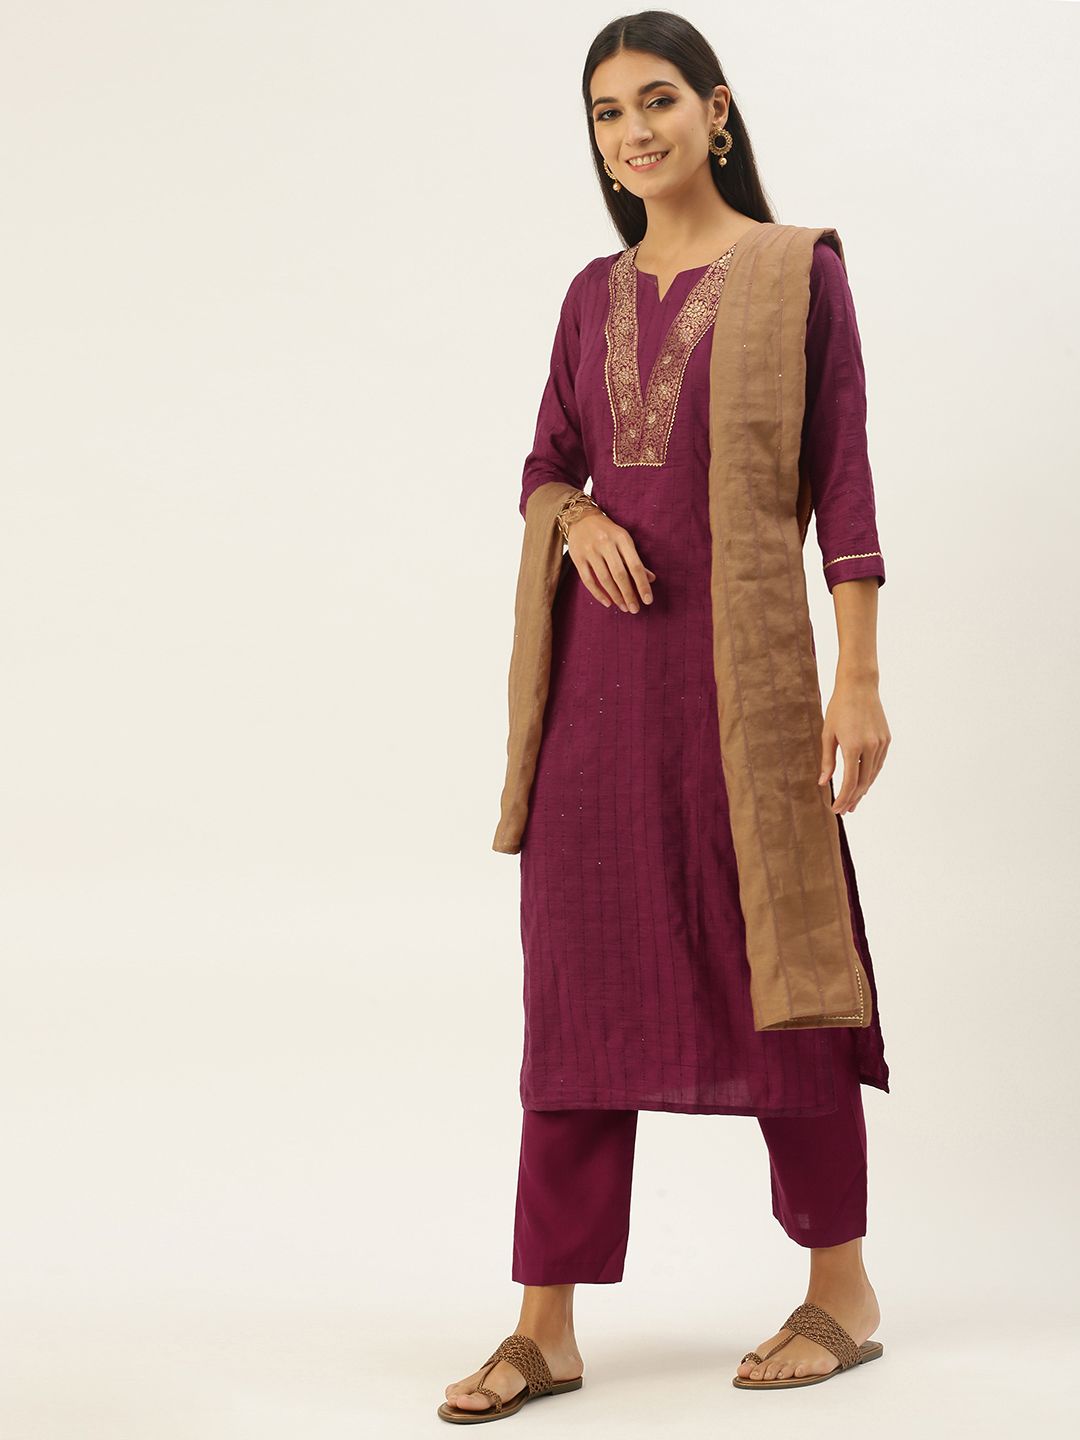 SheWill Magenta Unstitched Dress Material Price in India